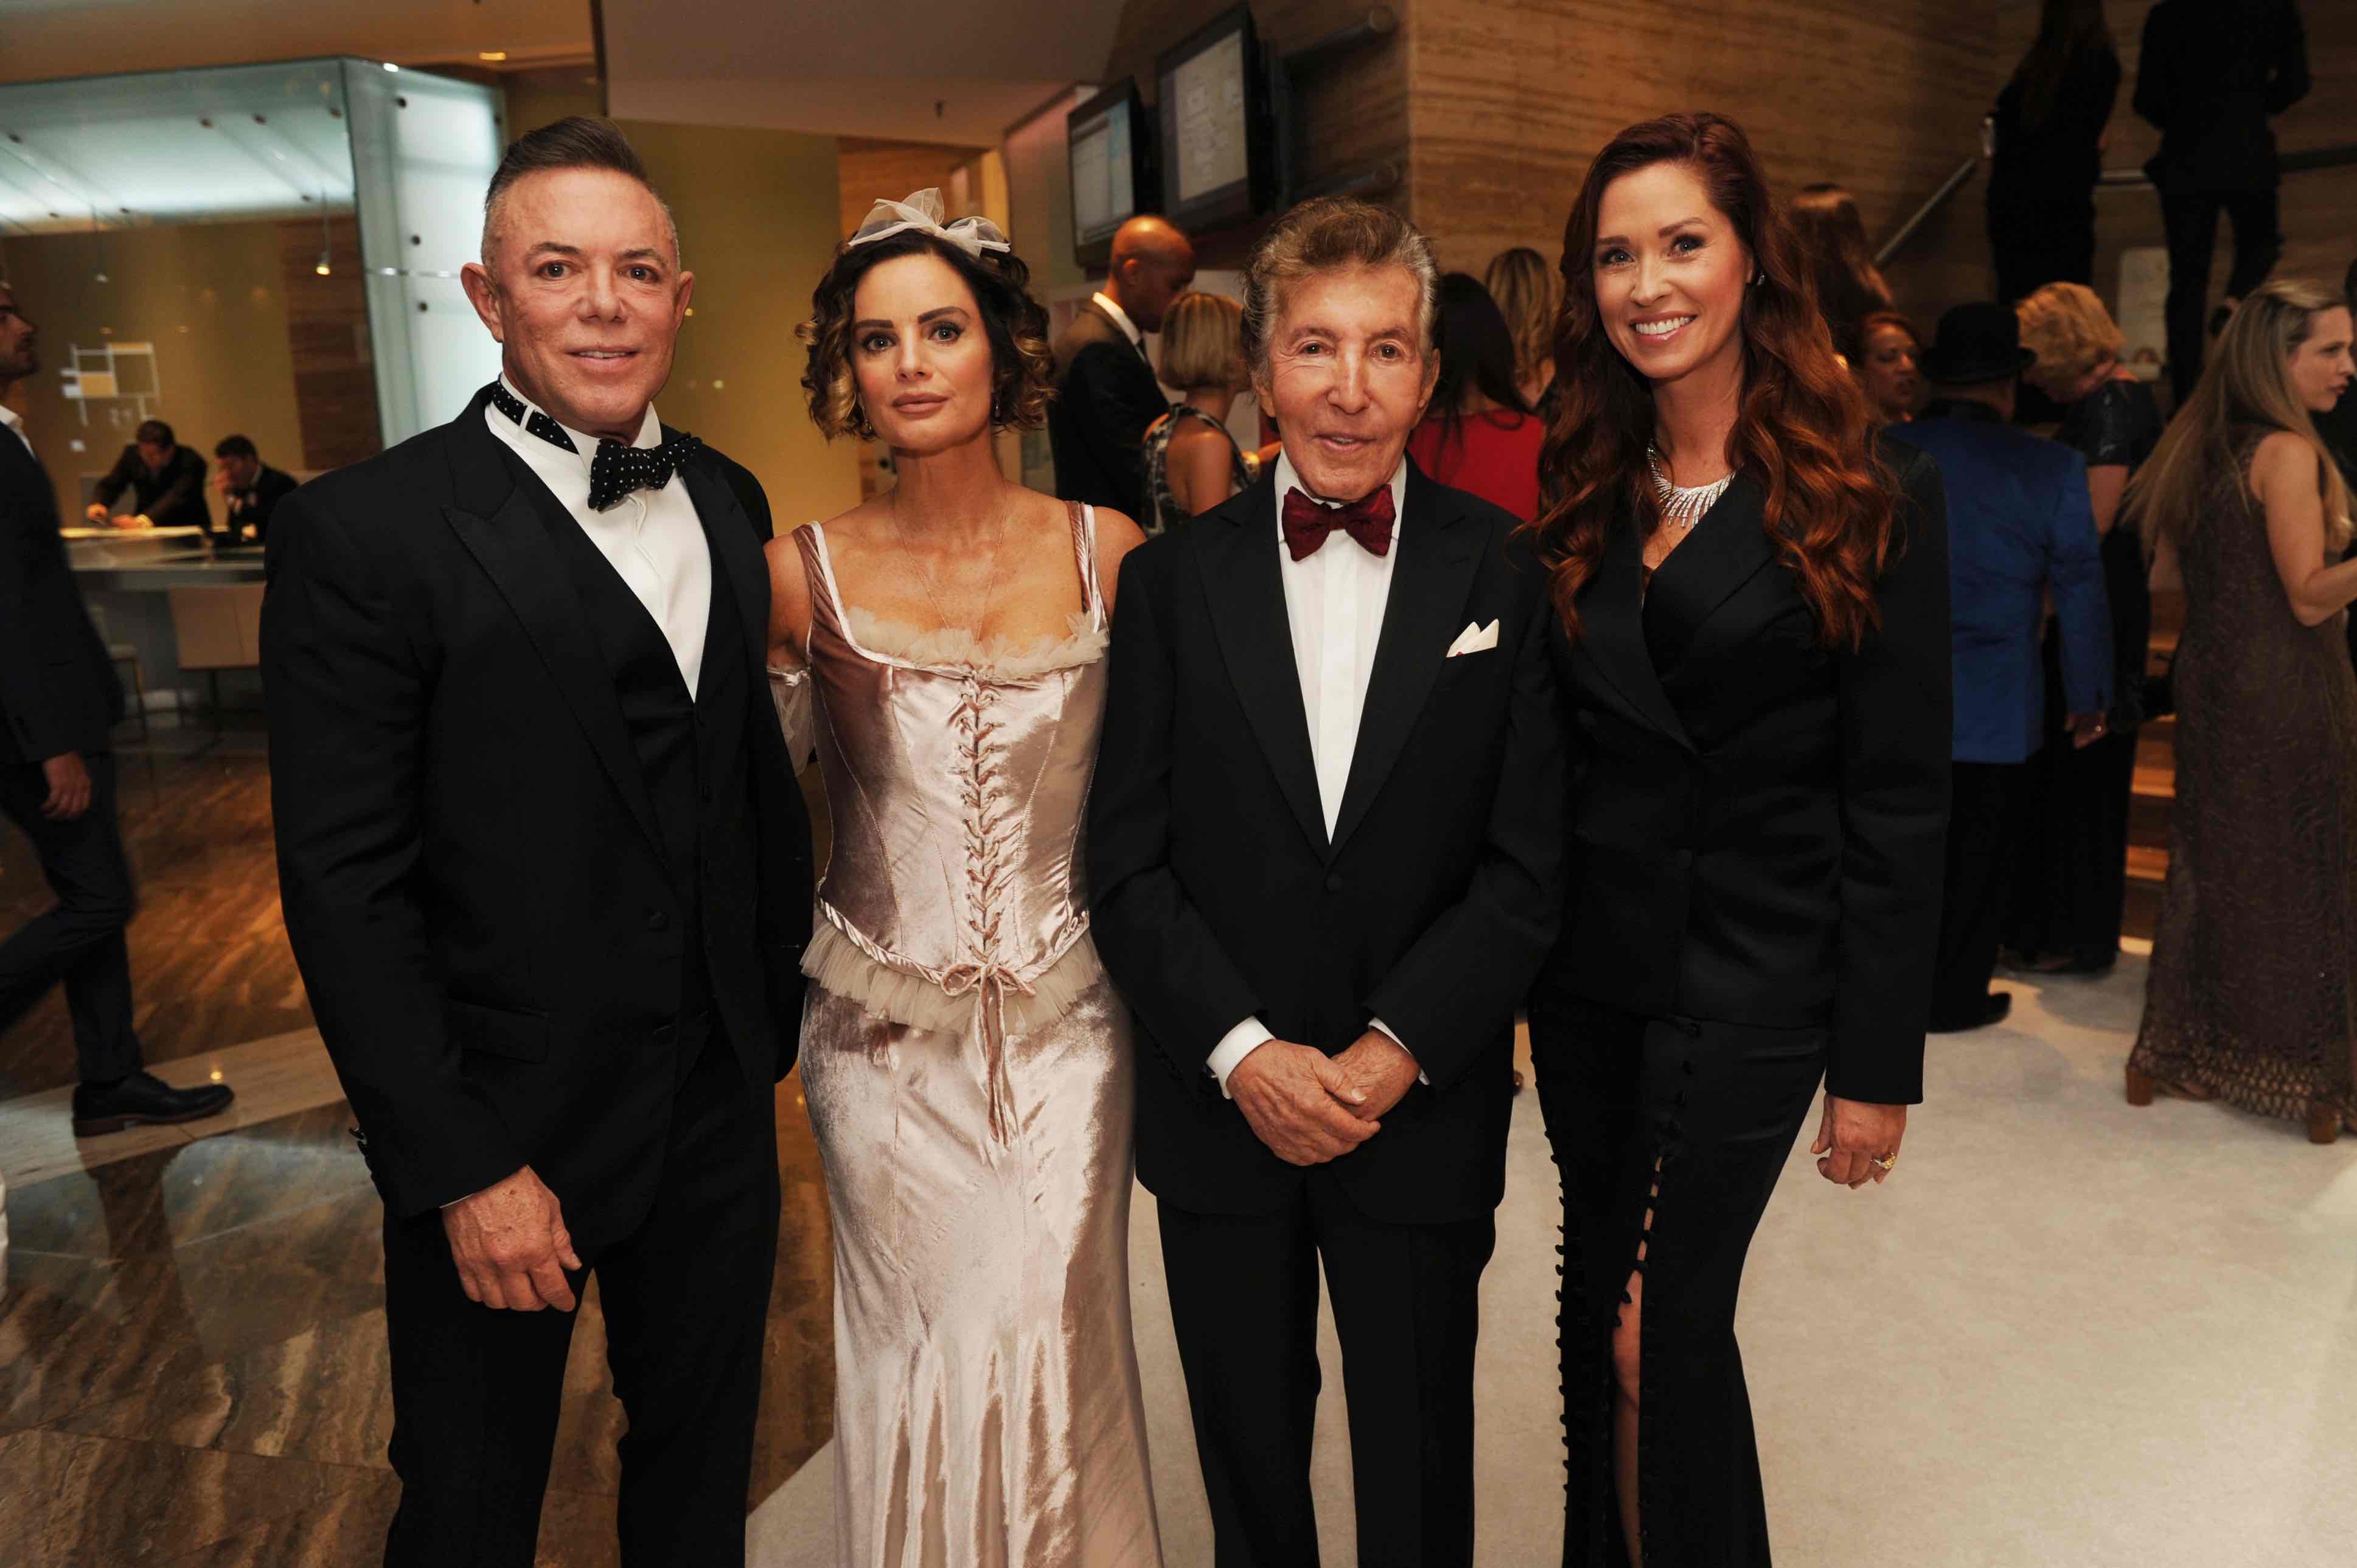 Inside The 23rd Annual MakeAWish Ball At The InterContinental Miami